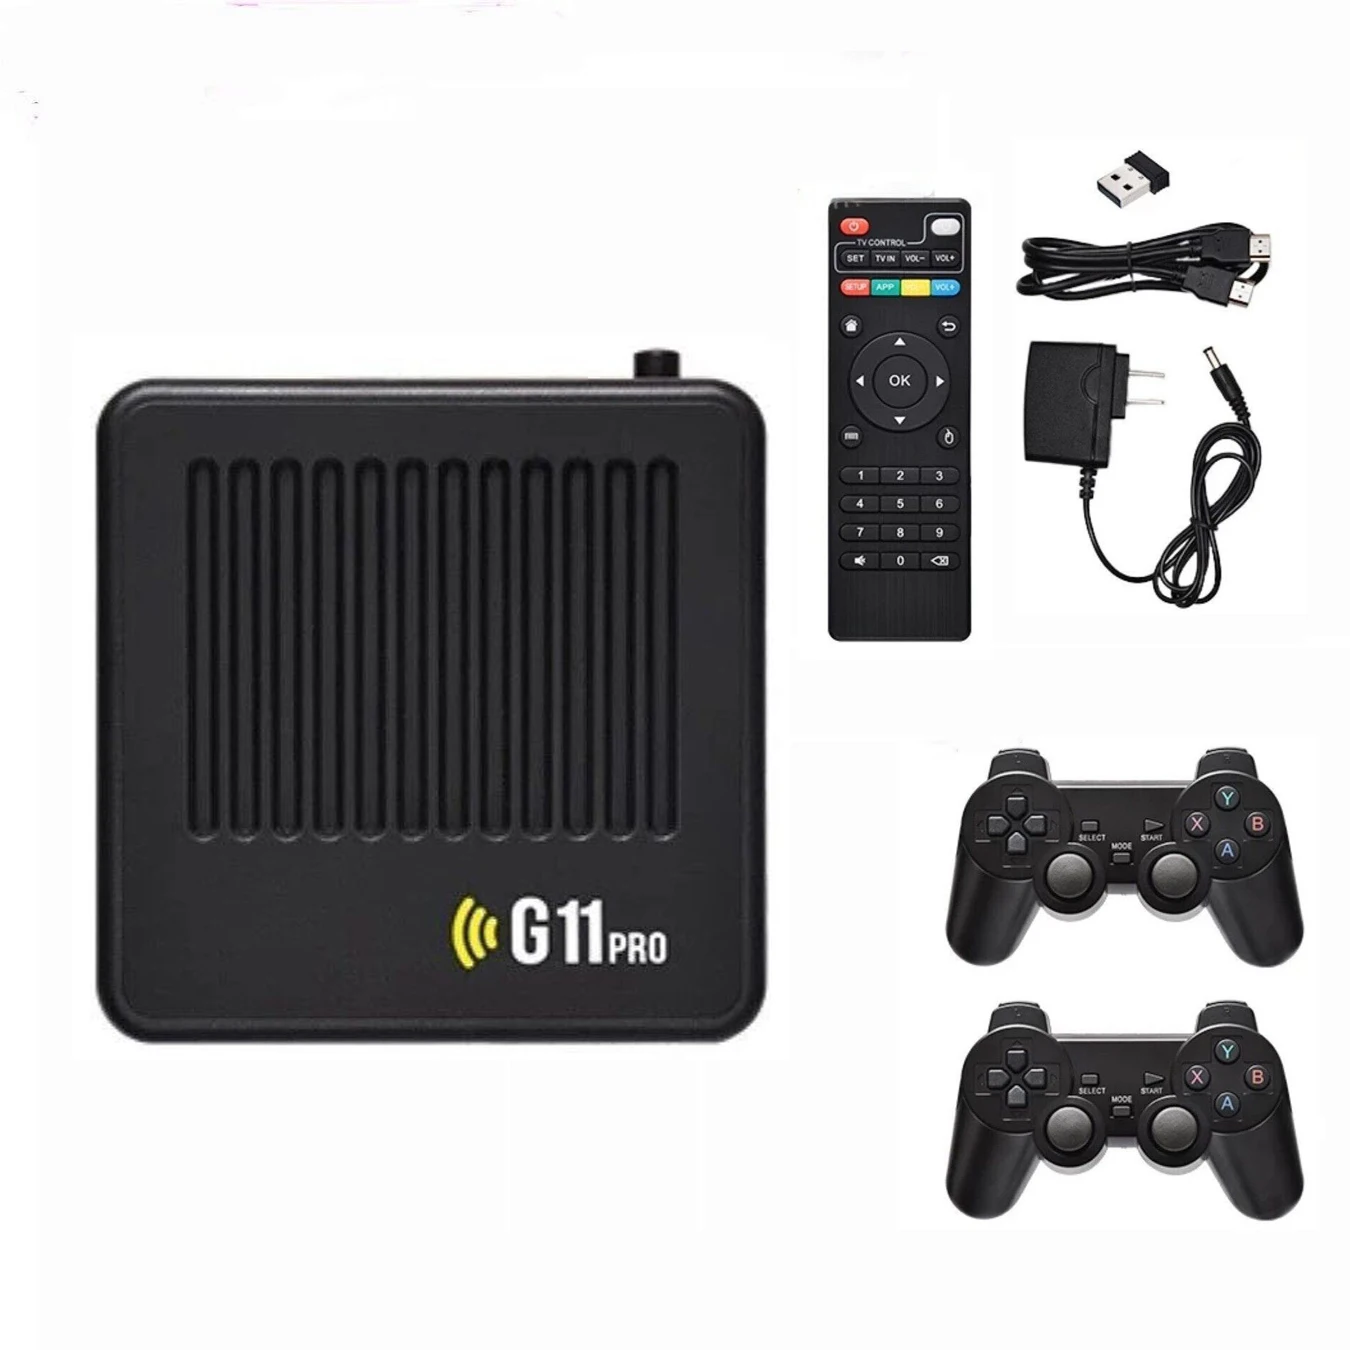 

G11 Pro Game Box Video Game Console 64/128GB 30000+ Games 4k Family Retro Classic games Console Support TV Box For PSP/DC/N64